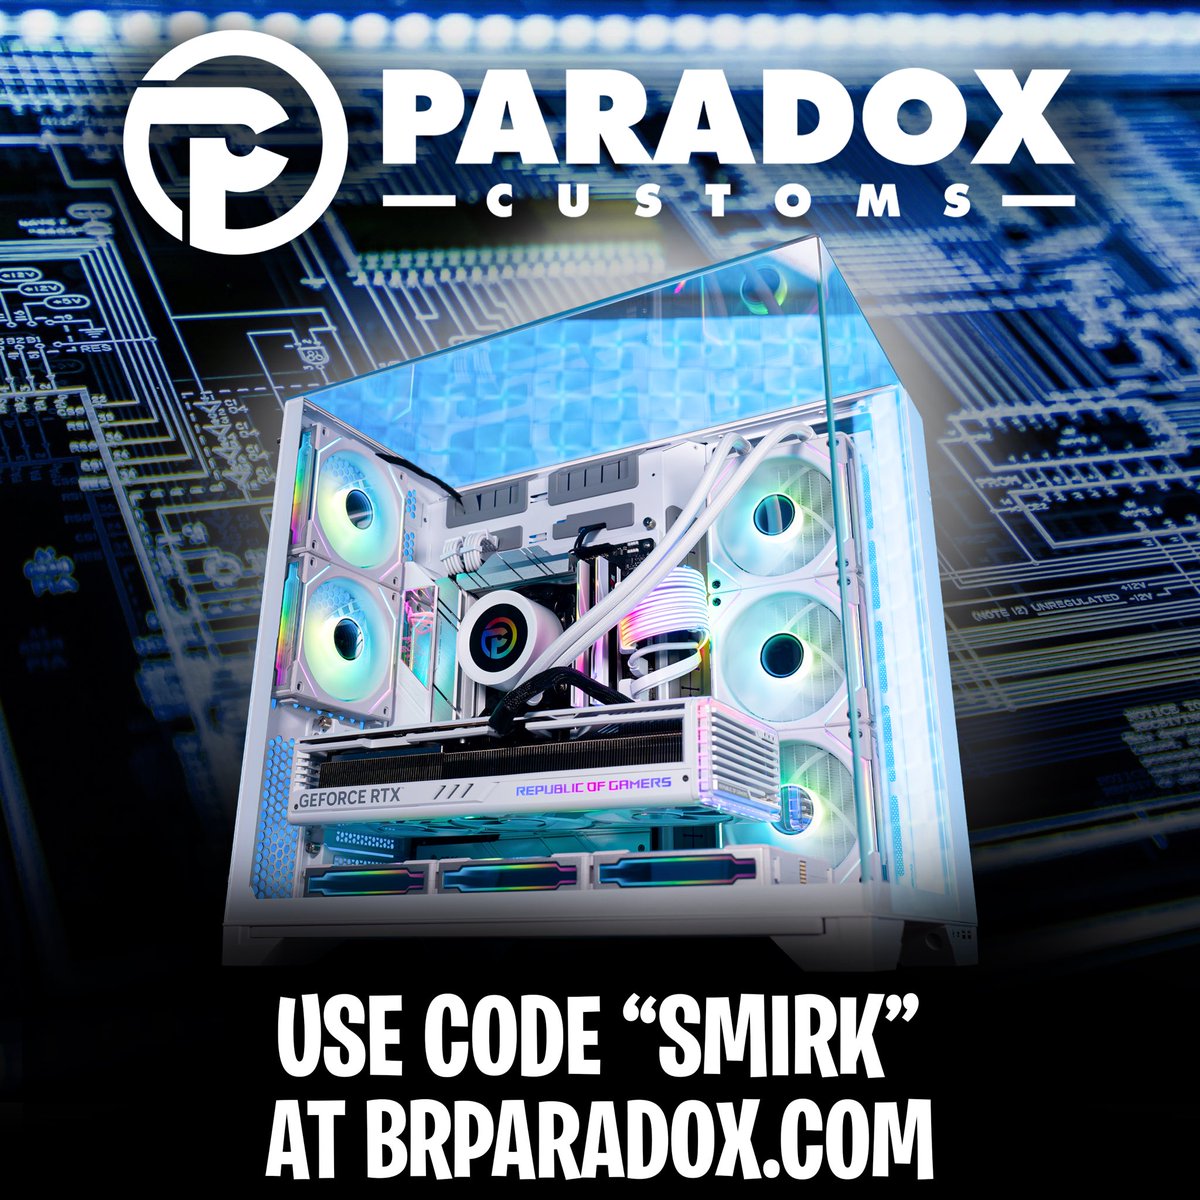 If you guys are in the market for a new PC, make sure you check out @Brparadox They make the BEST PCs in the business and when you do, be sure to use code “Smirk” at checkout!🔥💯